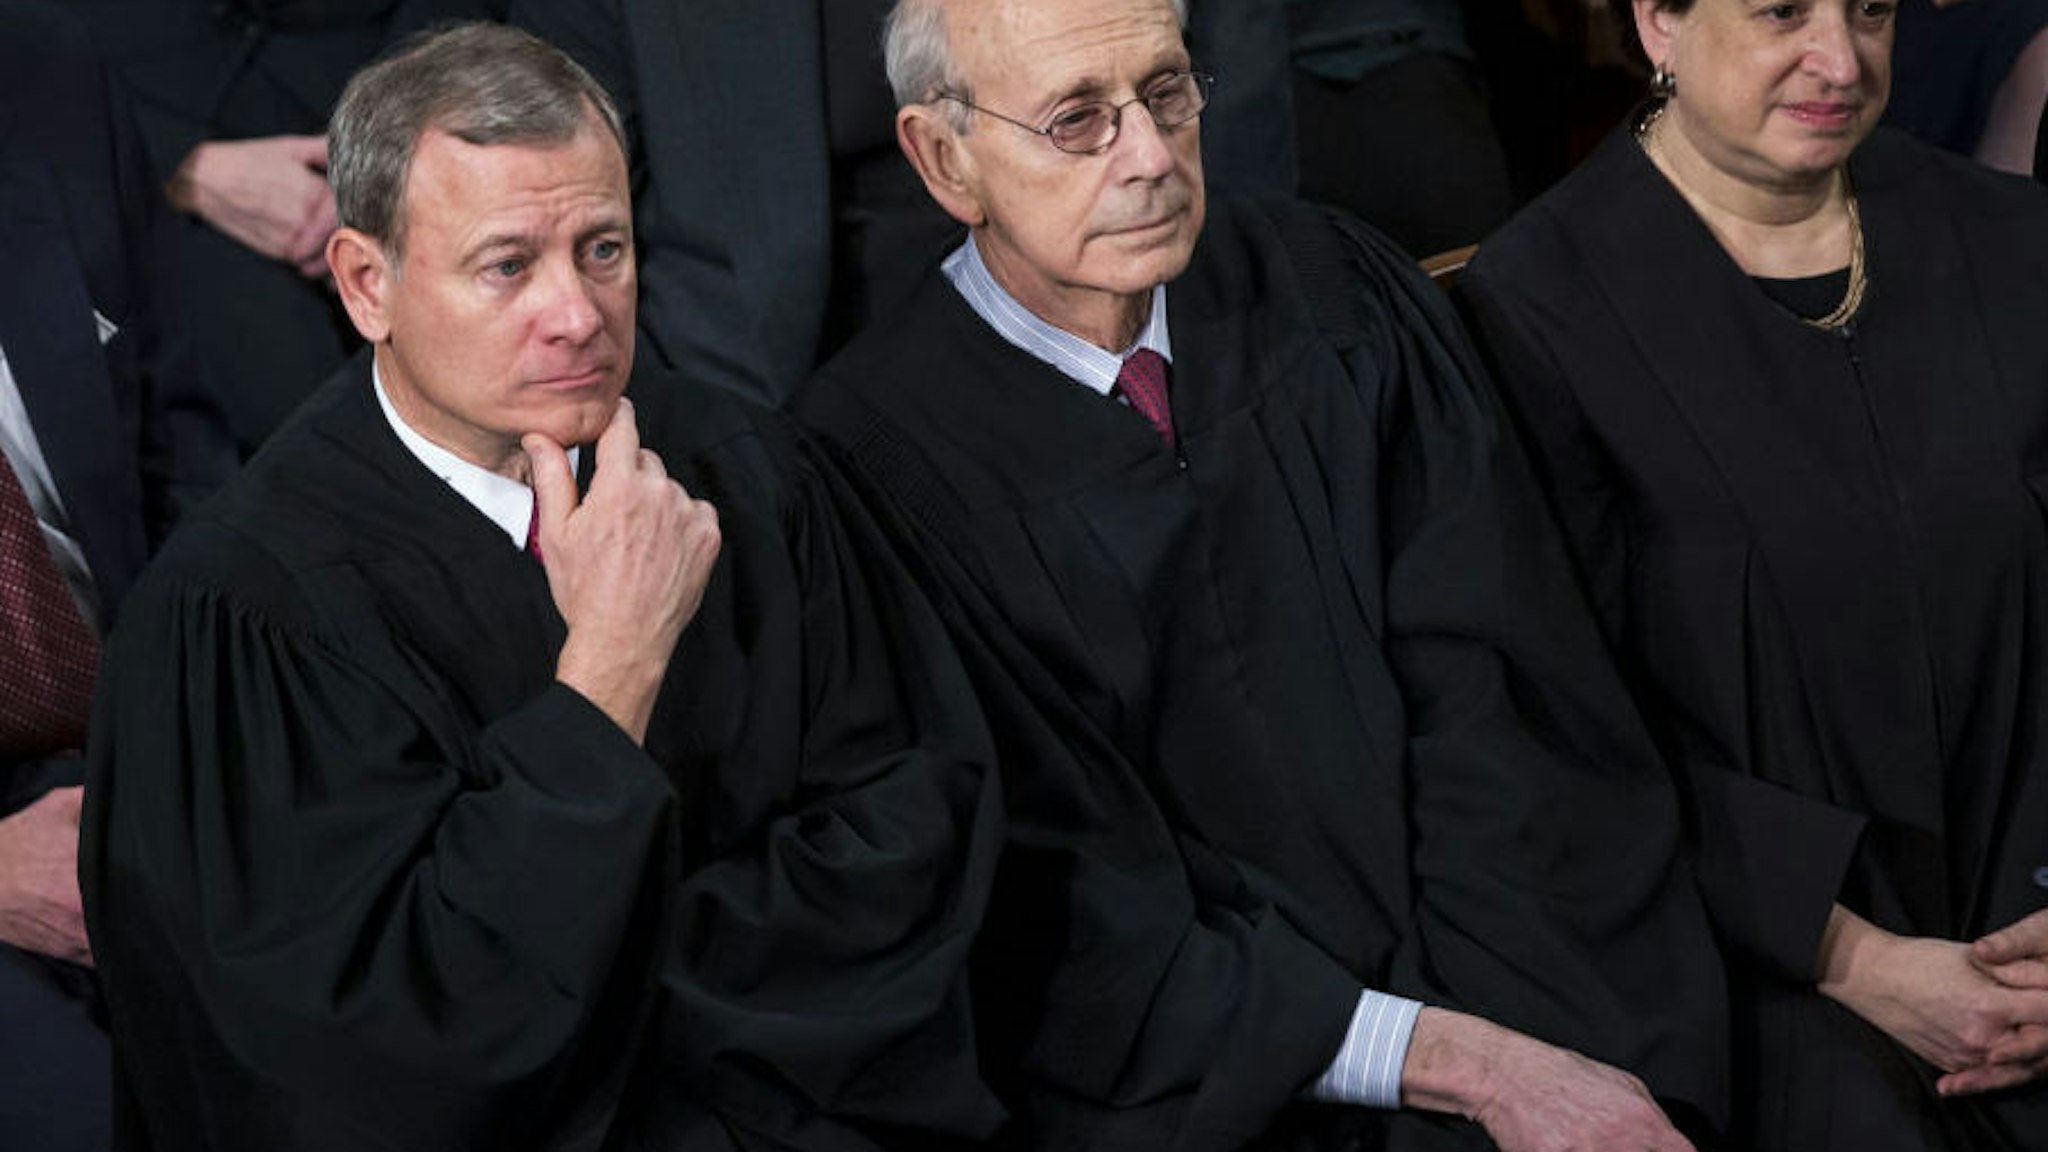 The Supreme Court Justices, from bottom left, Chief Justice John Roberts, Stephen Breyer, and Elena Kagan listen during a State of the Union address to a joint session of Congress at the U.S. Capitol in Washington, D.C., U.S., on Tuesday, Jan. 30, 2018. President Donald Trump sought to connect his presidency to the nation's prosperity in his first State of the Union address, arguing that the U.S. has arrived at a "new American moment" of wealth and opportunity.